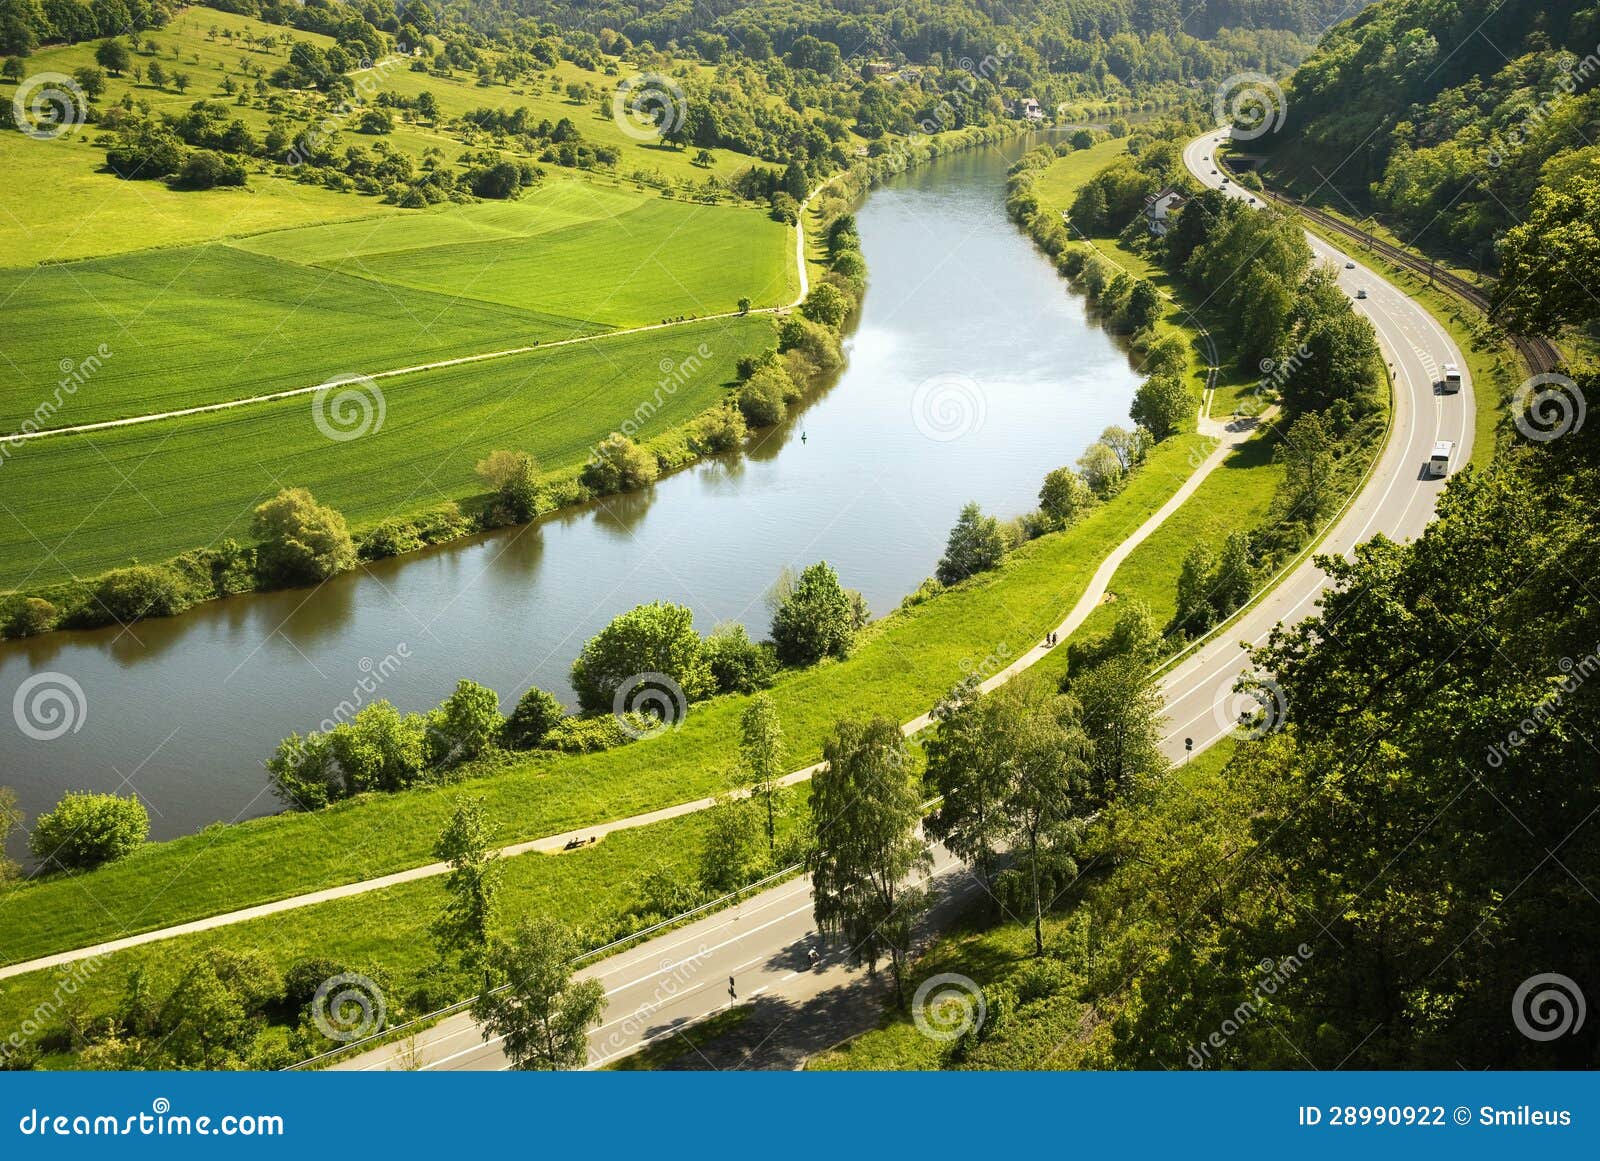 areal view on neckar river in germany